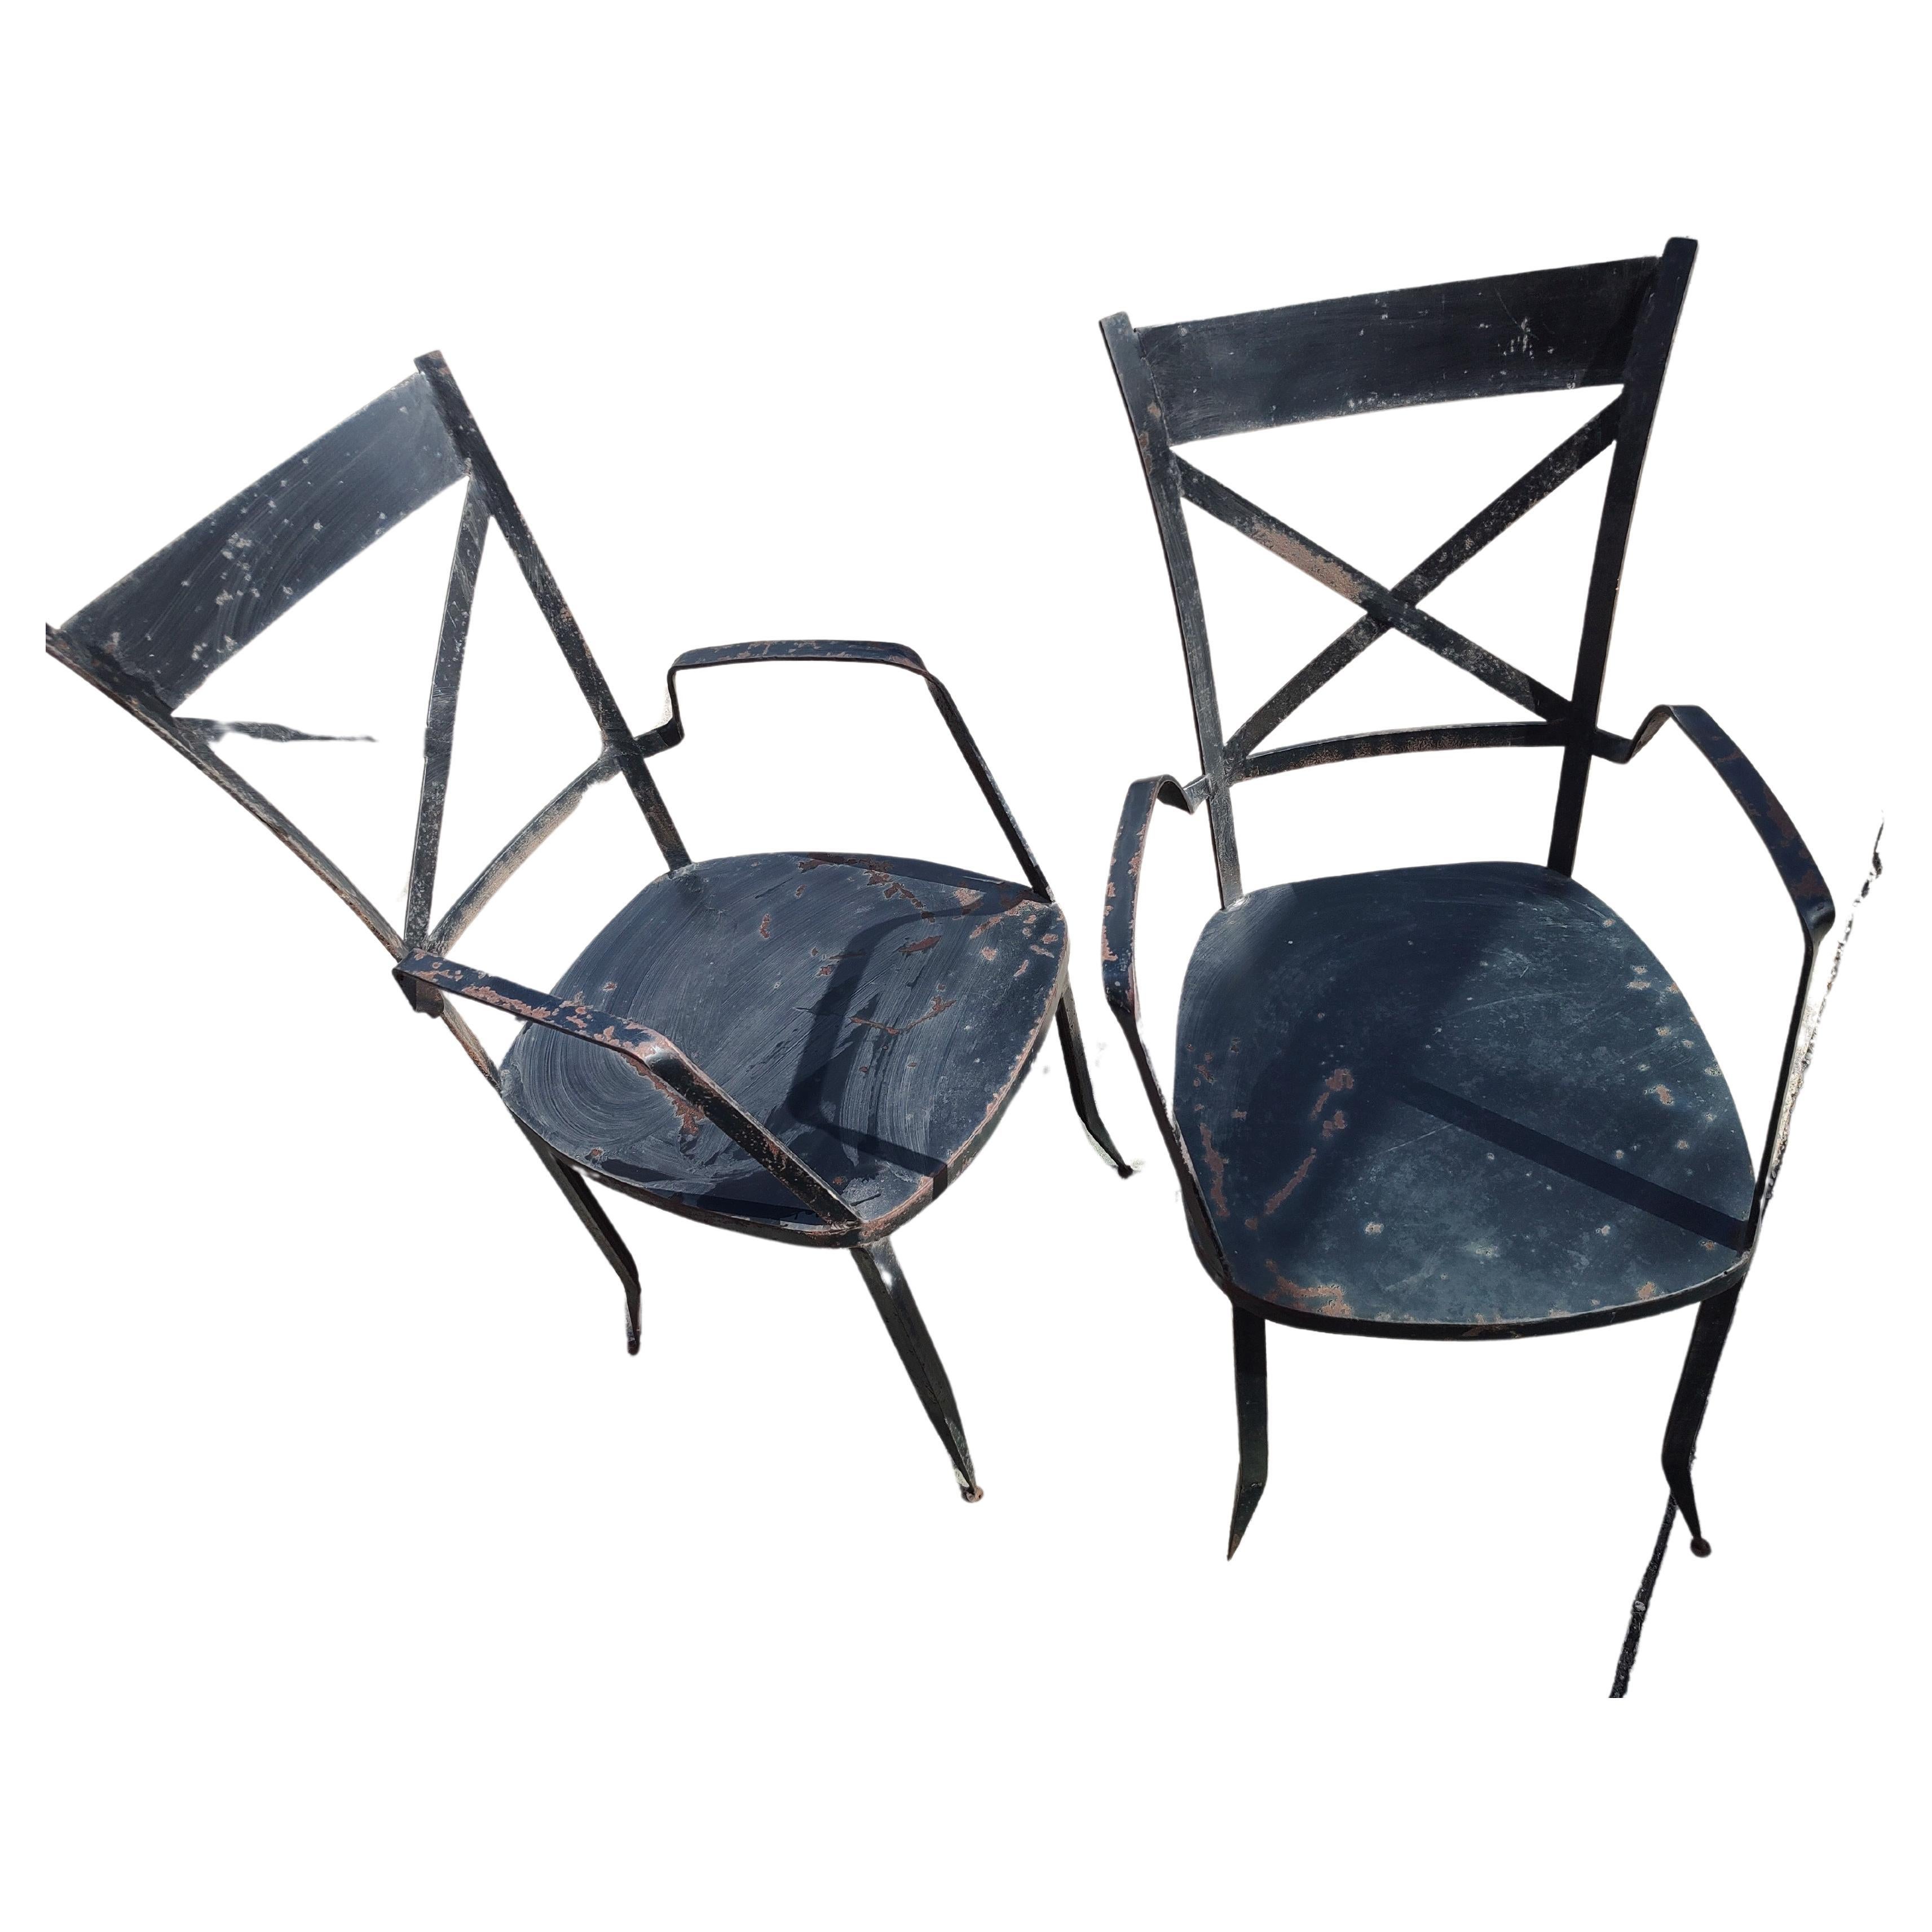 Minimalist Pair of Heavy Duty High Quality Iron Modern Sculptural Garden Patio Armchairs   For Sale